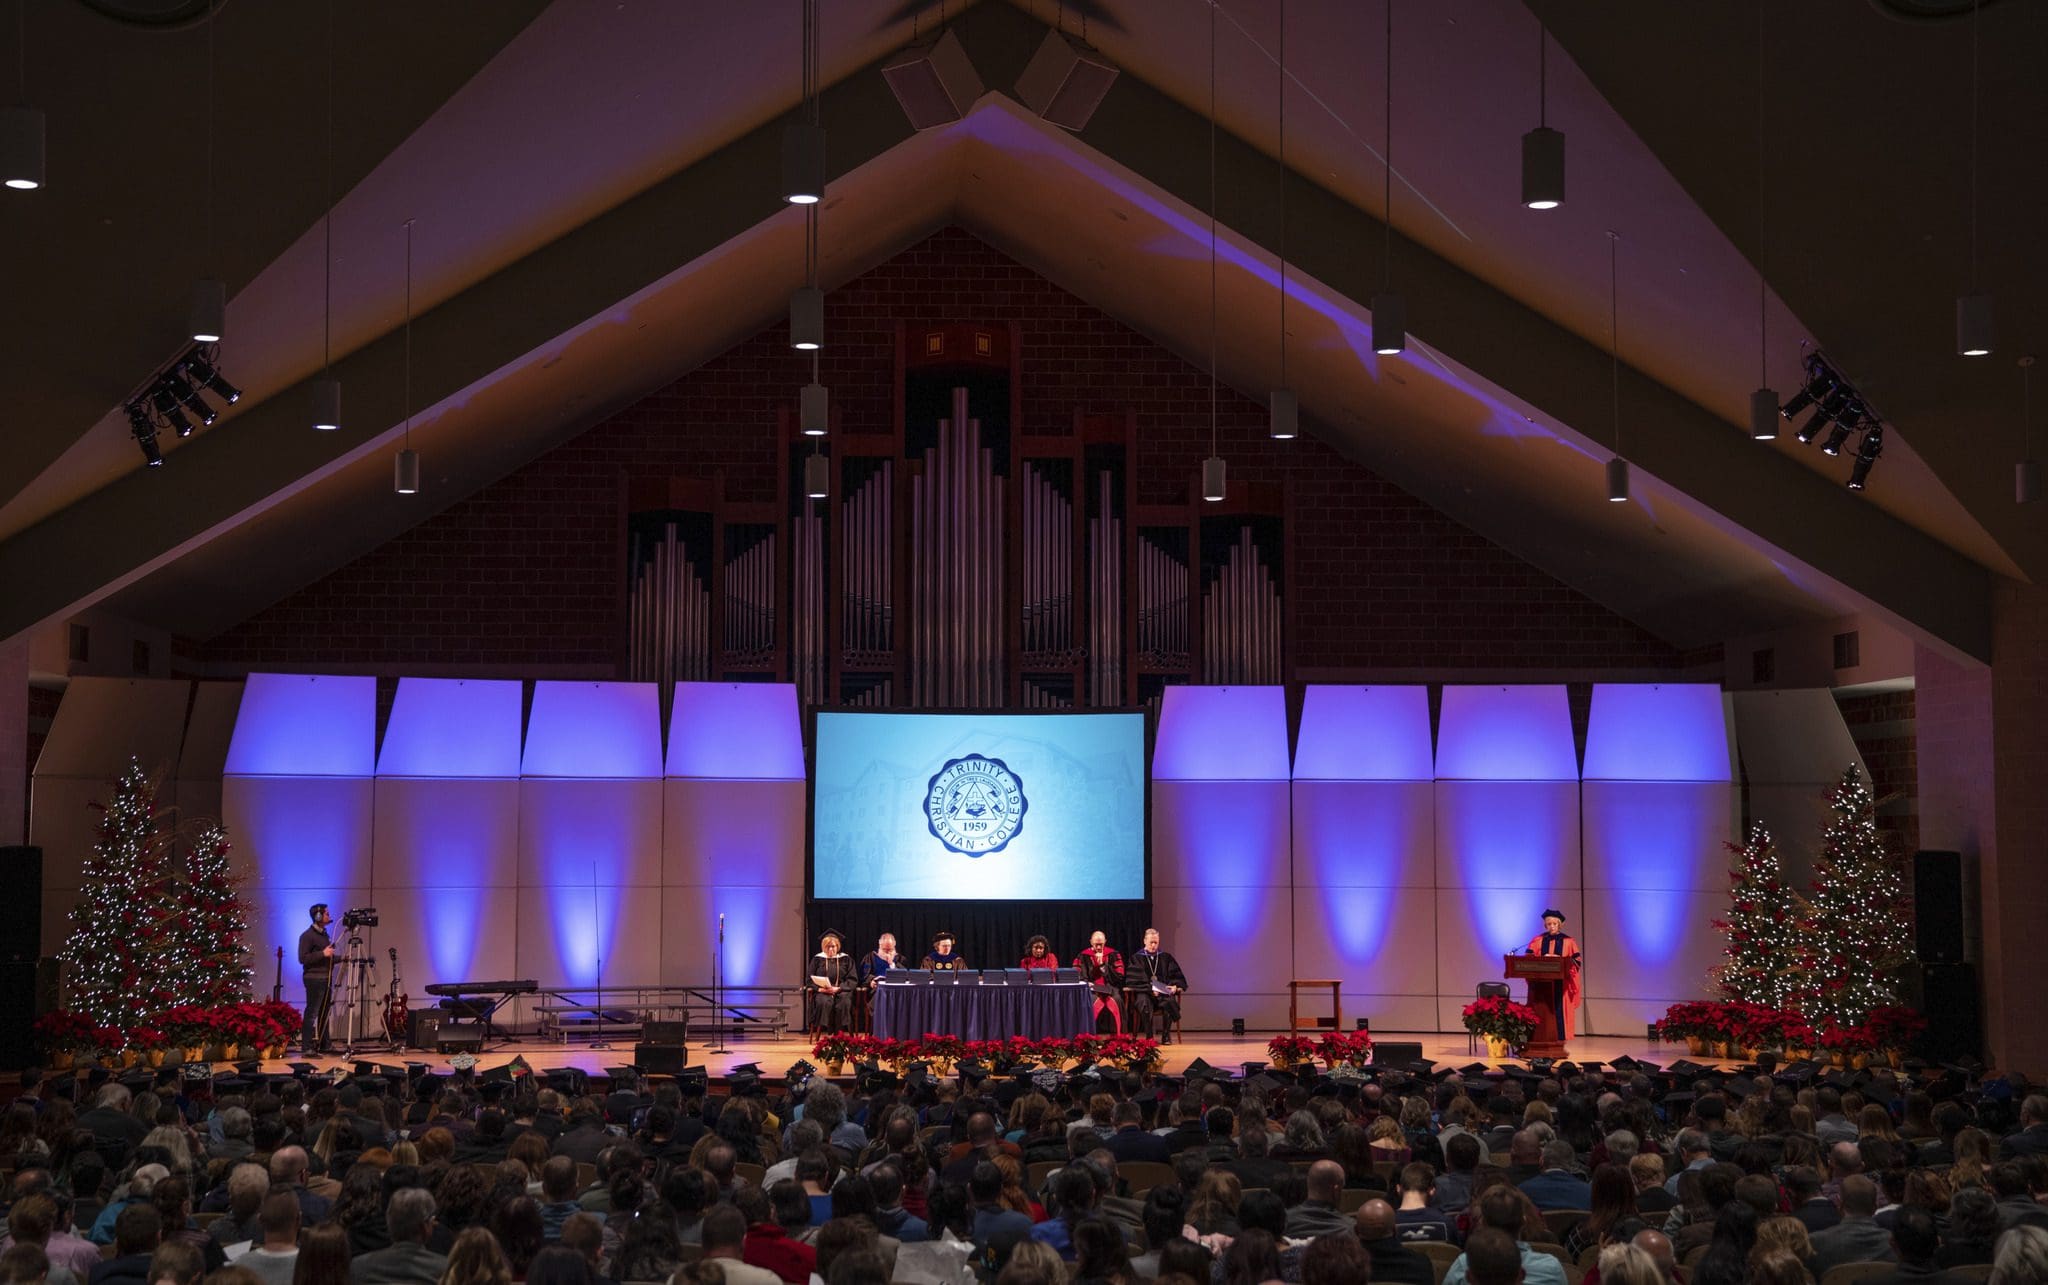 With pride and celebration, Trinity held its Fall Semester 2018 commencement ceremony on Dec. 15 in Ozinga Chapel Auditorium.